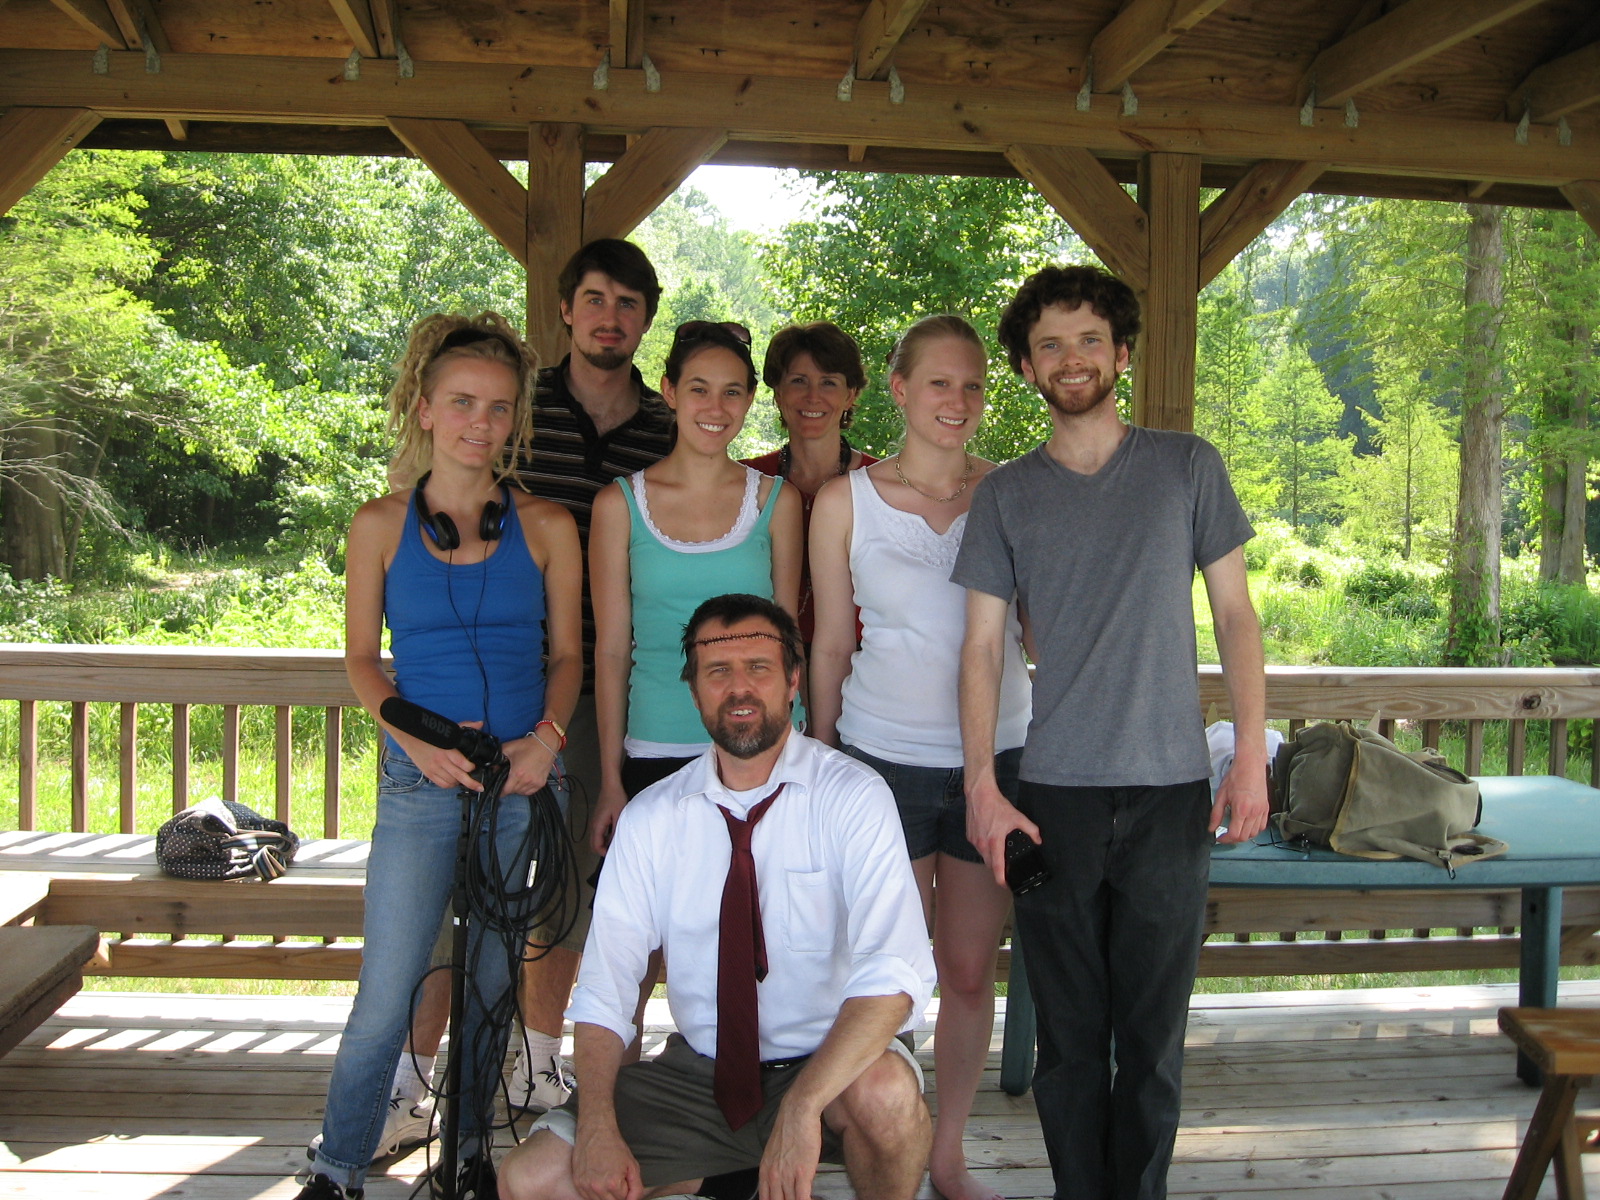 The cast & crew of the short film DESULTORY RESEARCH AT OATES LAB May 2010